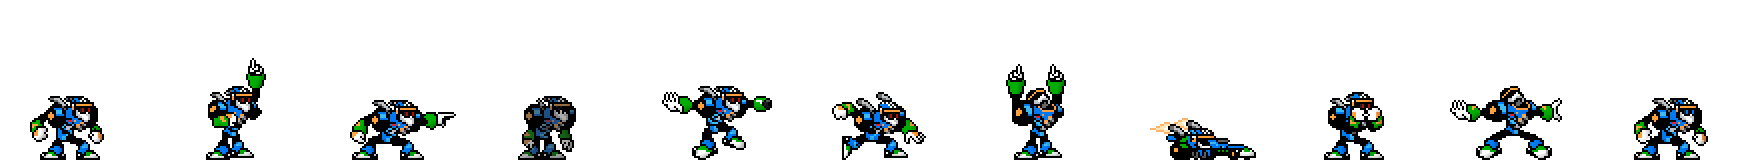 Turbo Man | Base Sprite Right<div style="margin-top: 4px; letting-spacing: 1px; font-size: 90%; font-family: Courier New; color: rgb(159, 150, 172);">[robot:right:base]{turbo-man}</div>